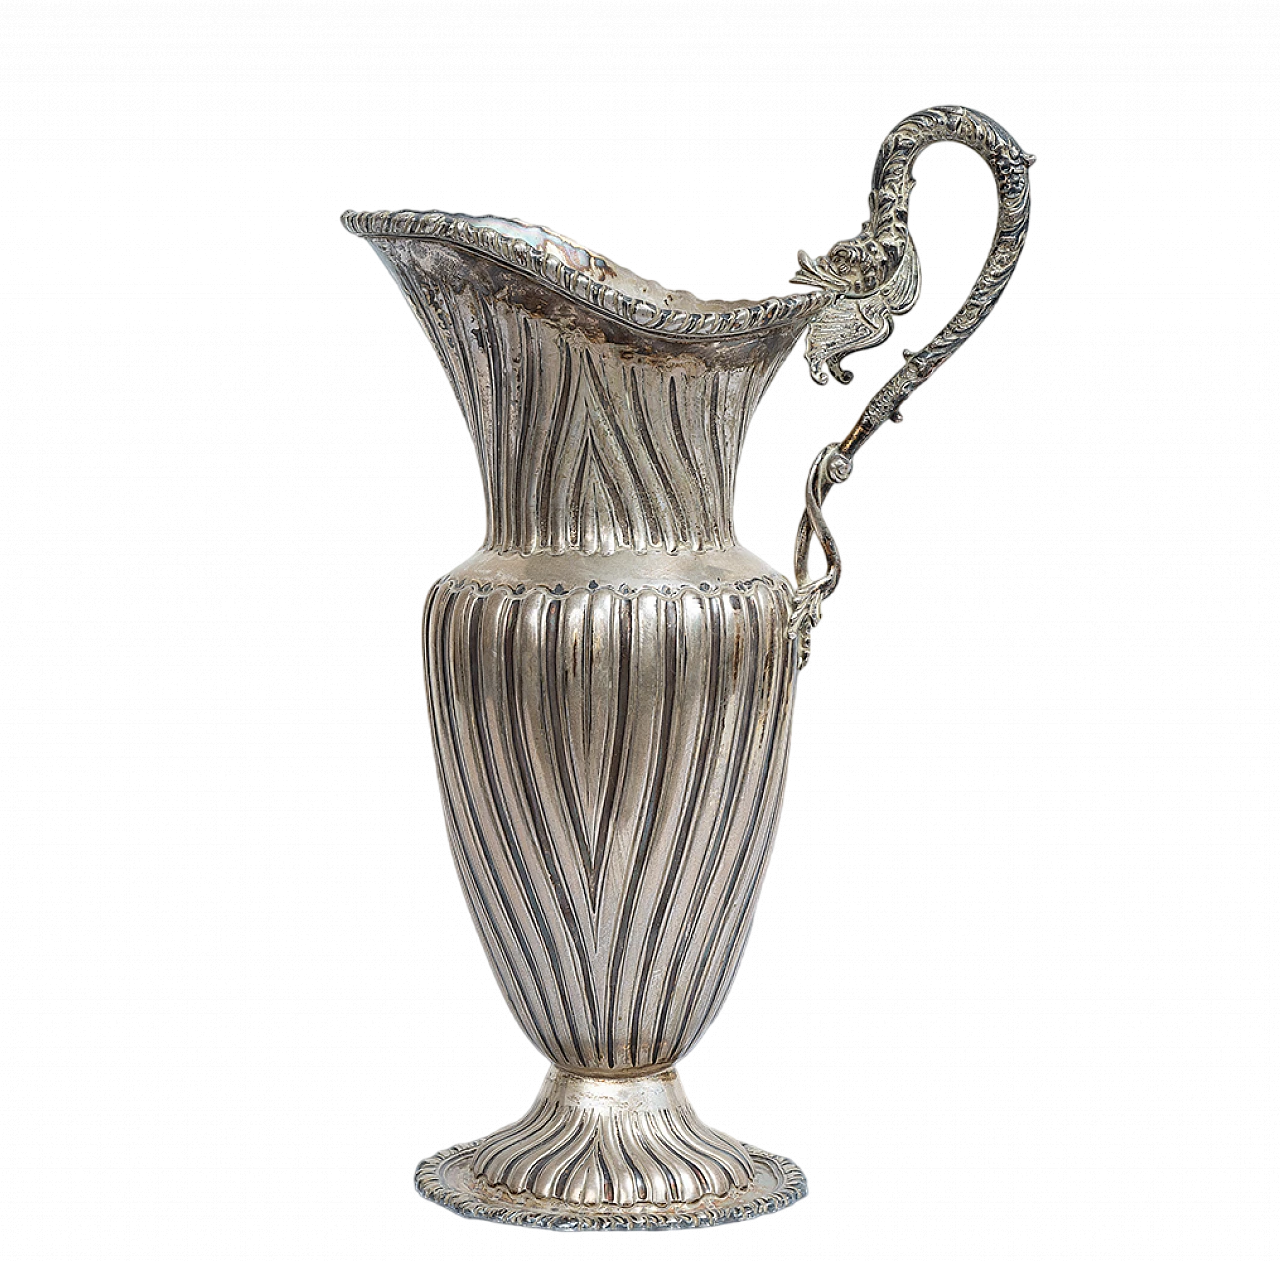 Silver sinusoidal-shaped jug with thick chisel on the edge 9